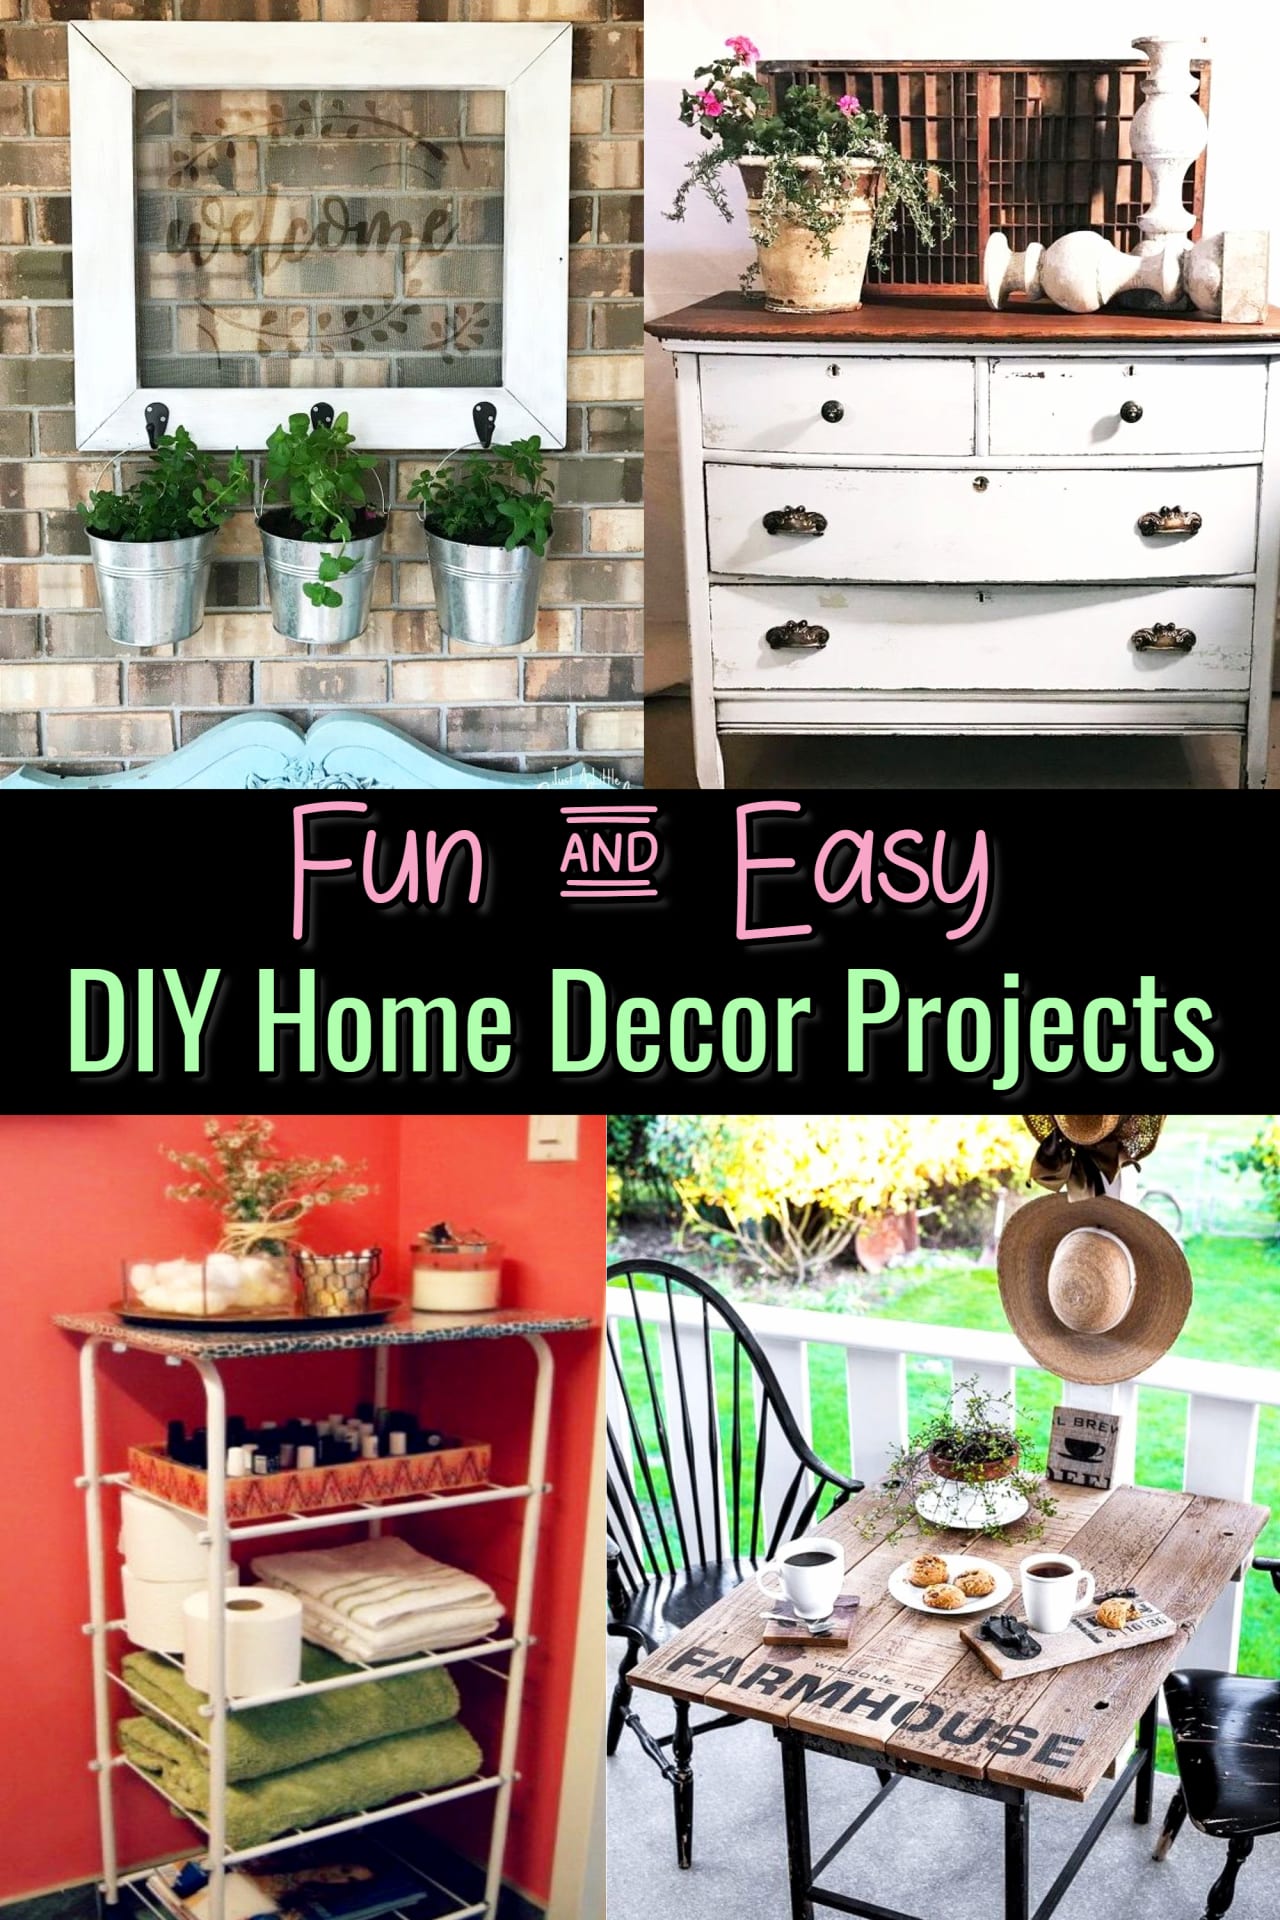 DIY Crafts For The Home Projects We Love